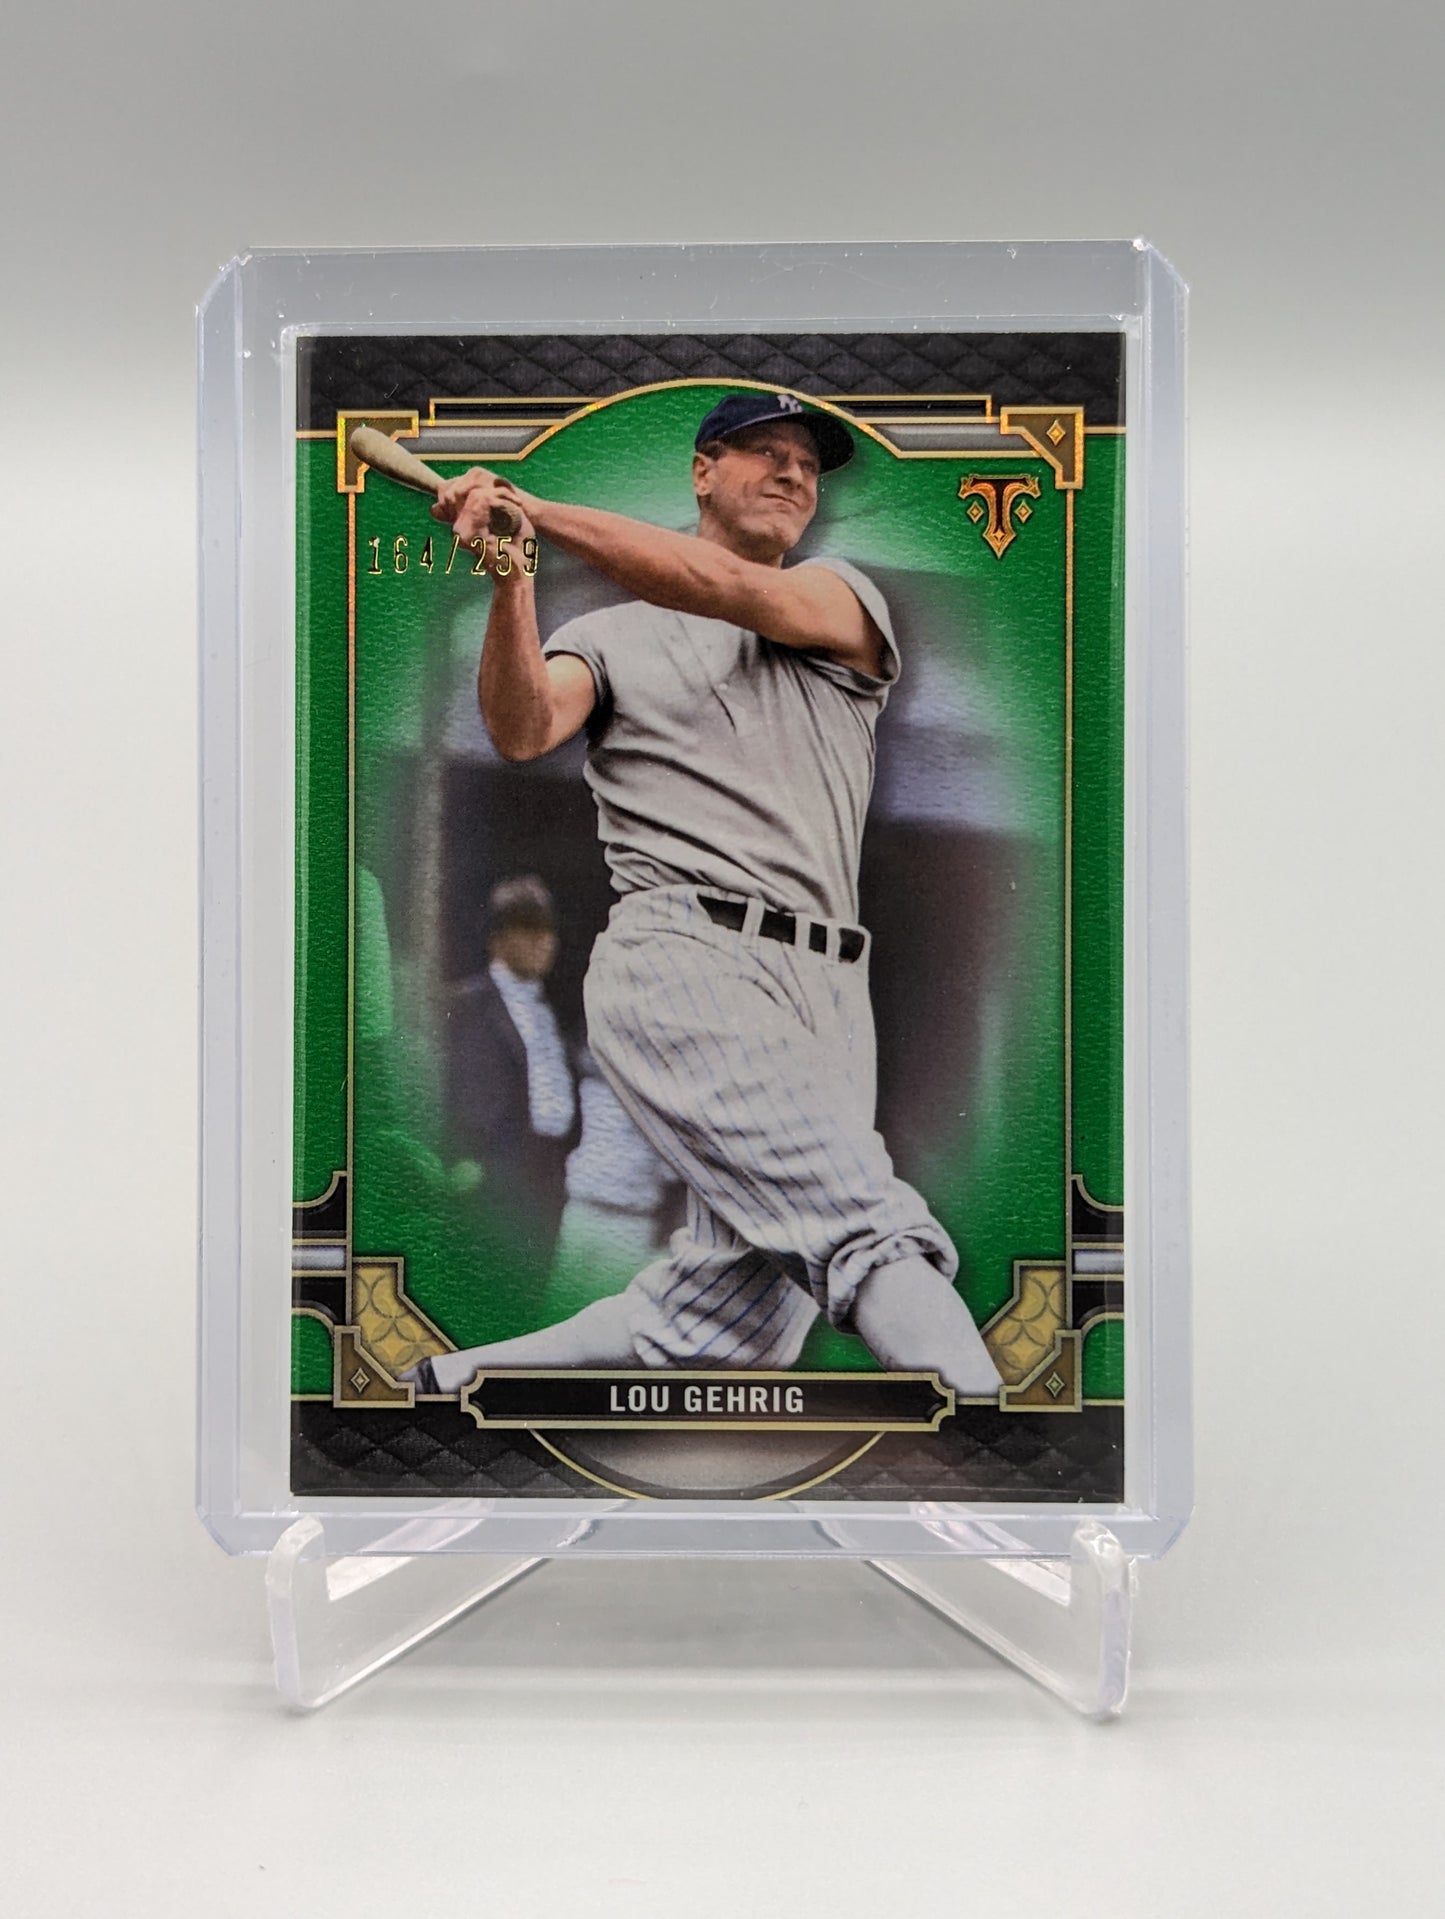 2022 Topps Triple Threads Emerald #18 Lou Gehrig #/259 Yankees